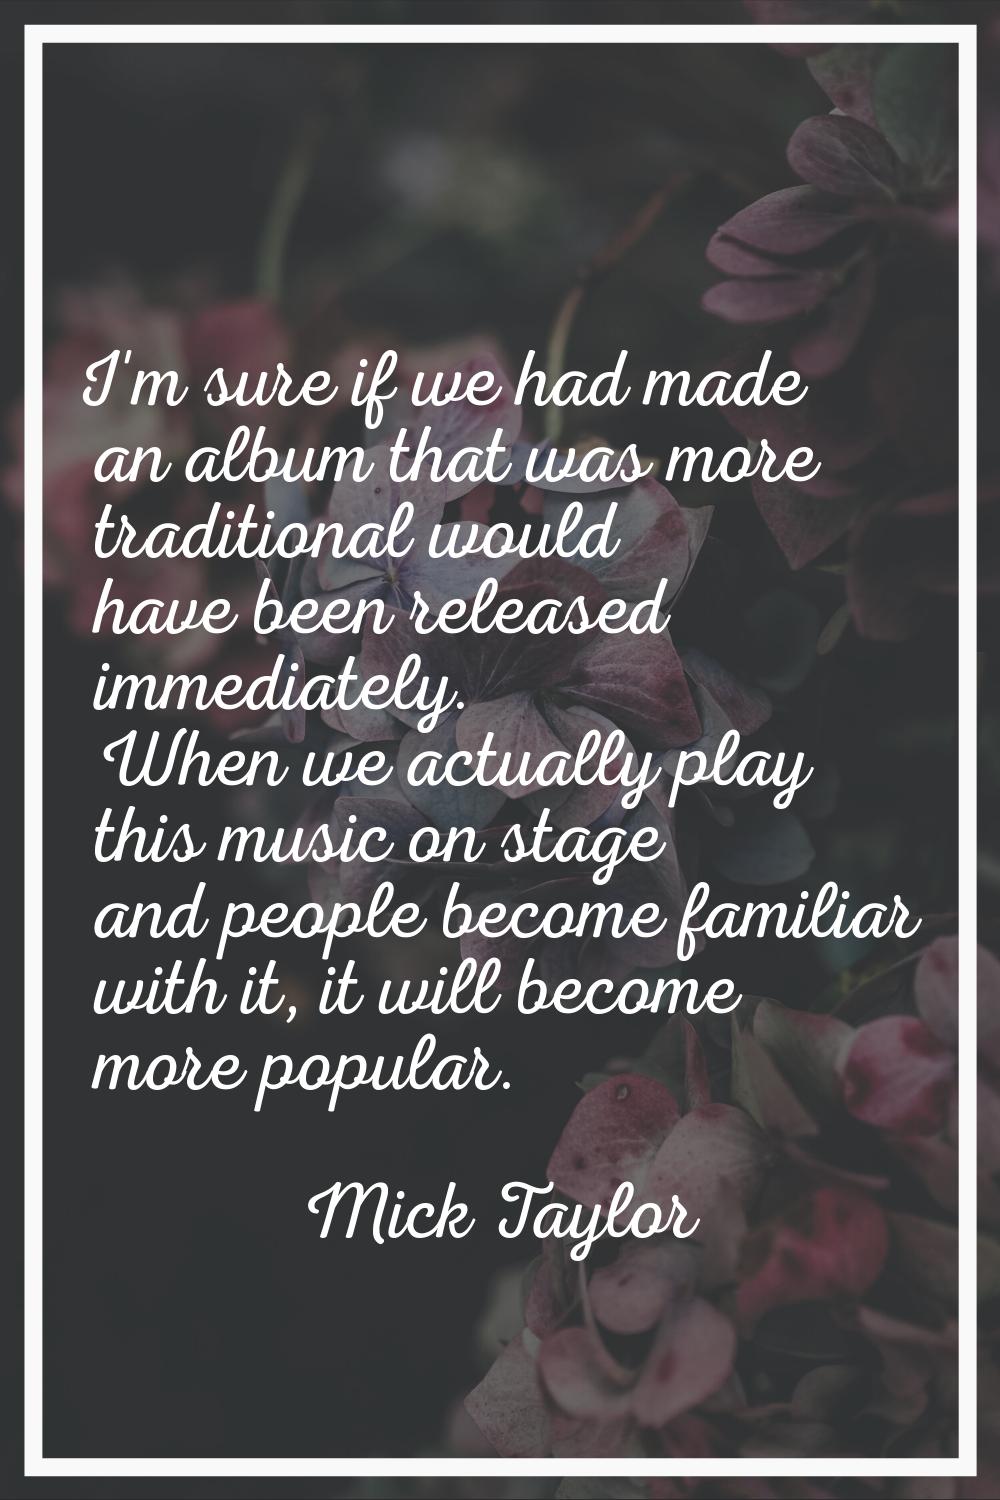 I'm sure if we had made an album that was more traditional would have been released immediately. Wh